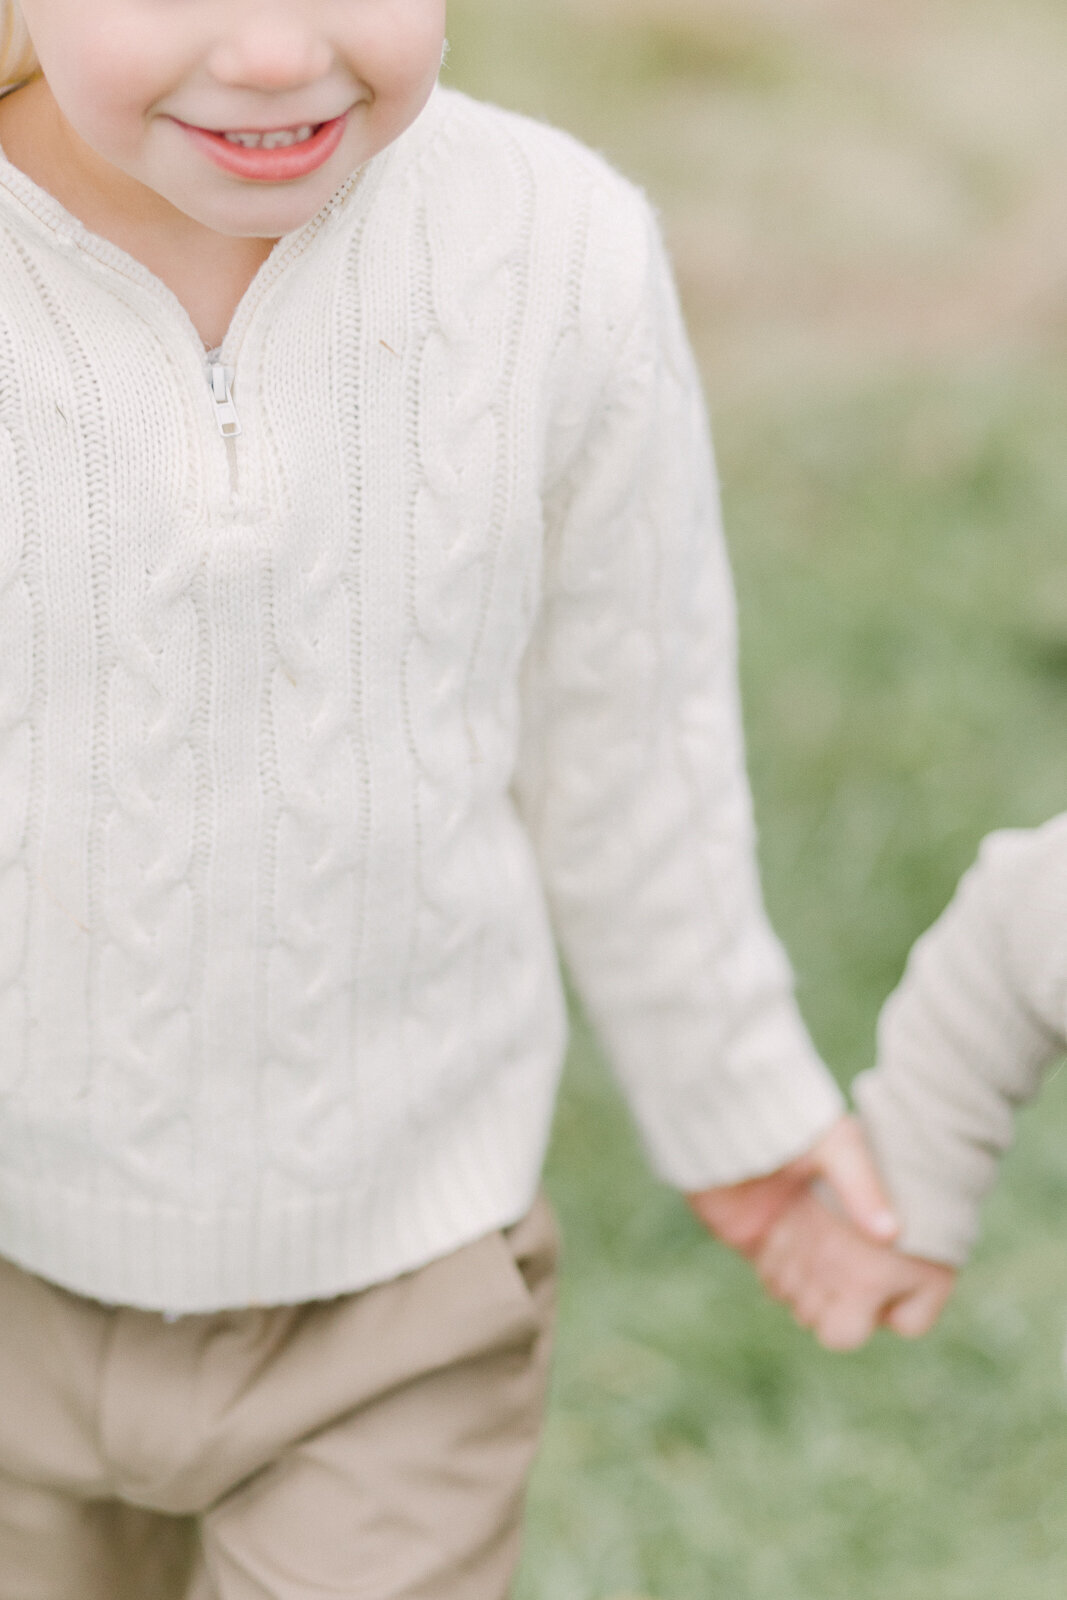 A close up image focusing on a young boy holding his little sister's hand while walking in a field